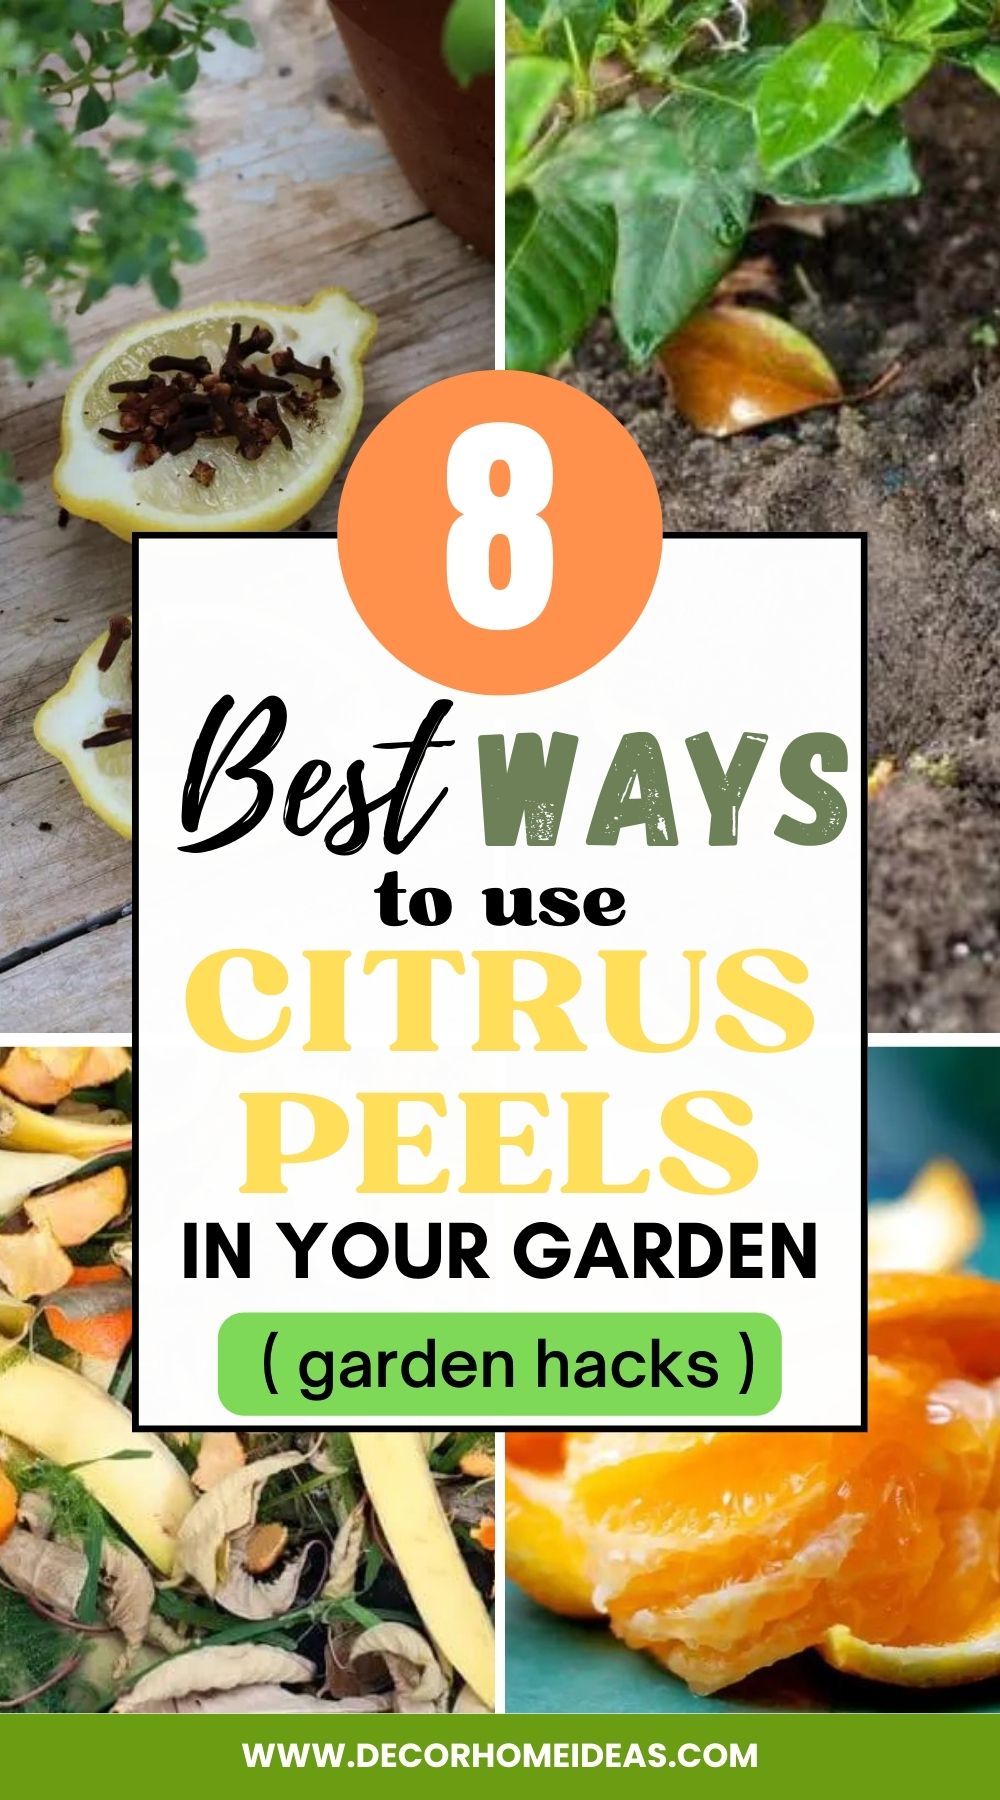 Get creative with citrus peels and discover 8 amazing uses for your garden! From fertilizers to pest repellents, learn how to make the most of citrus peels in your garden.